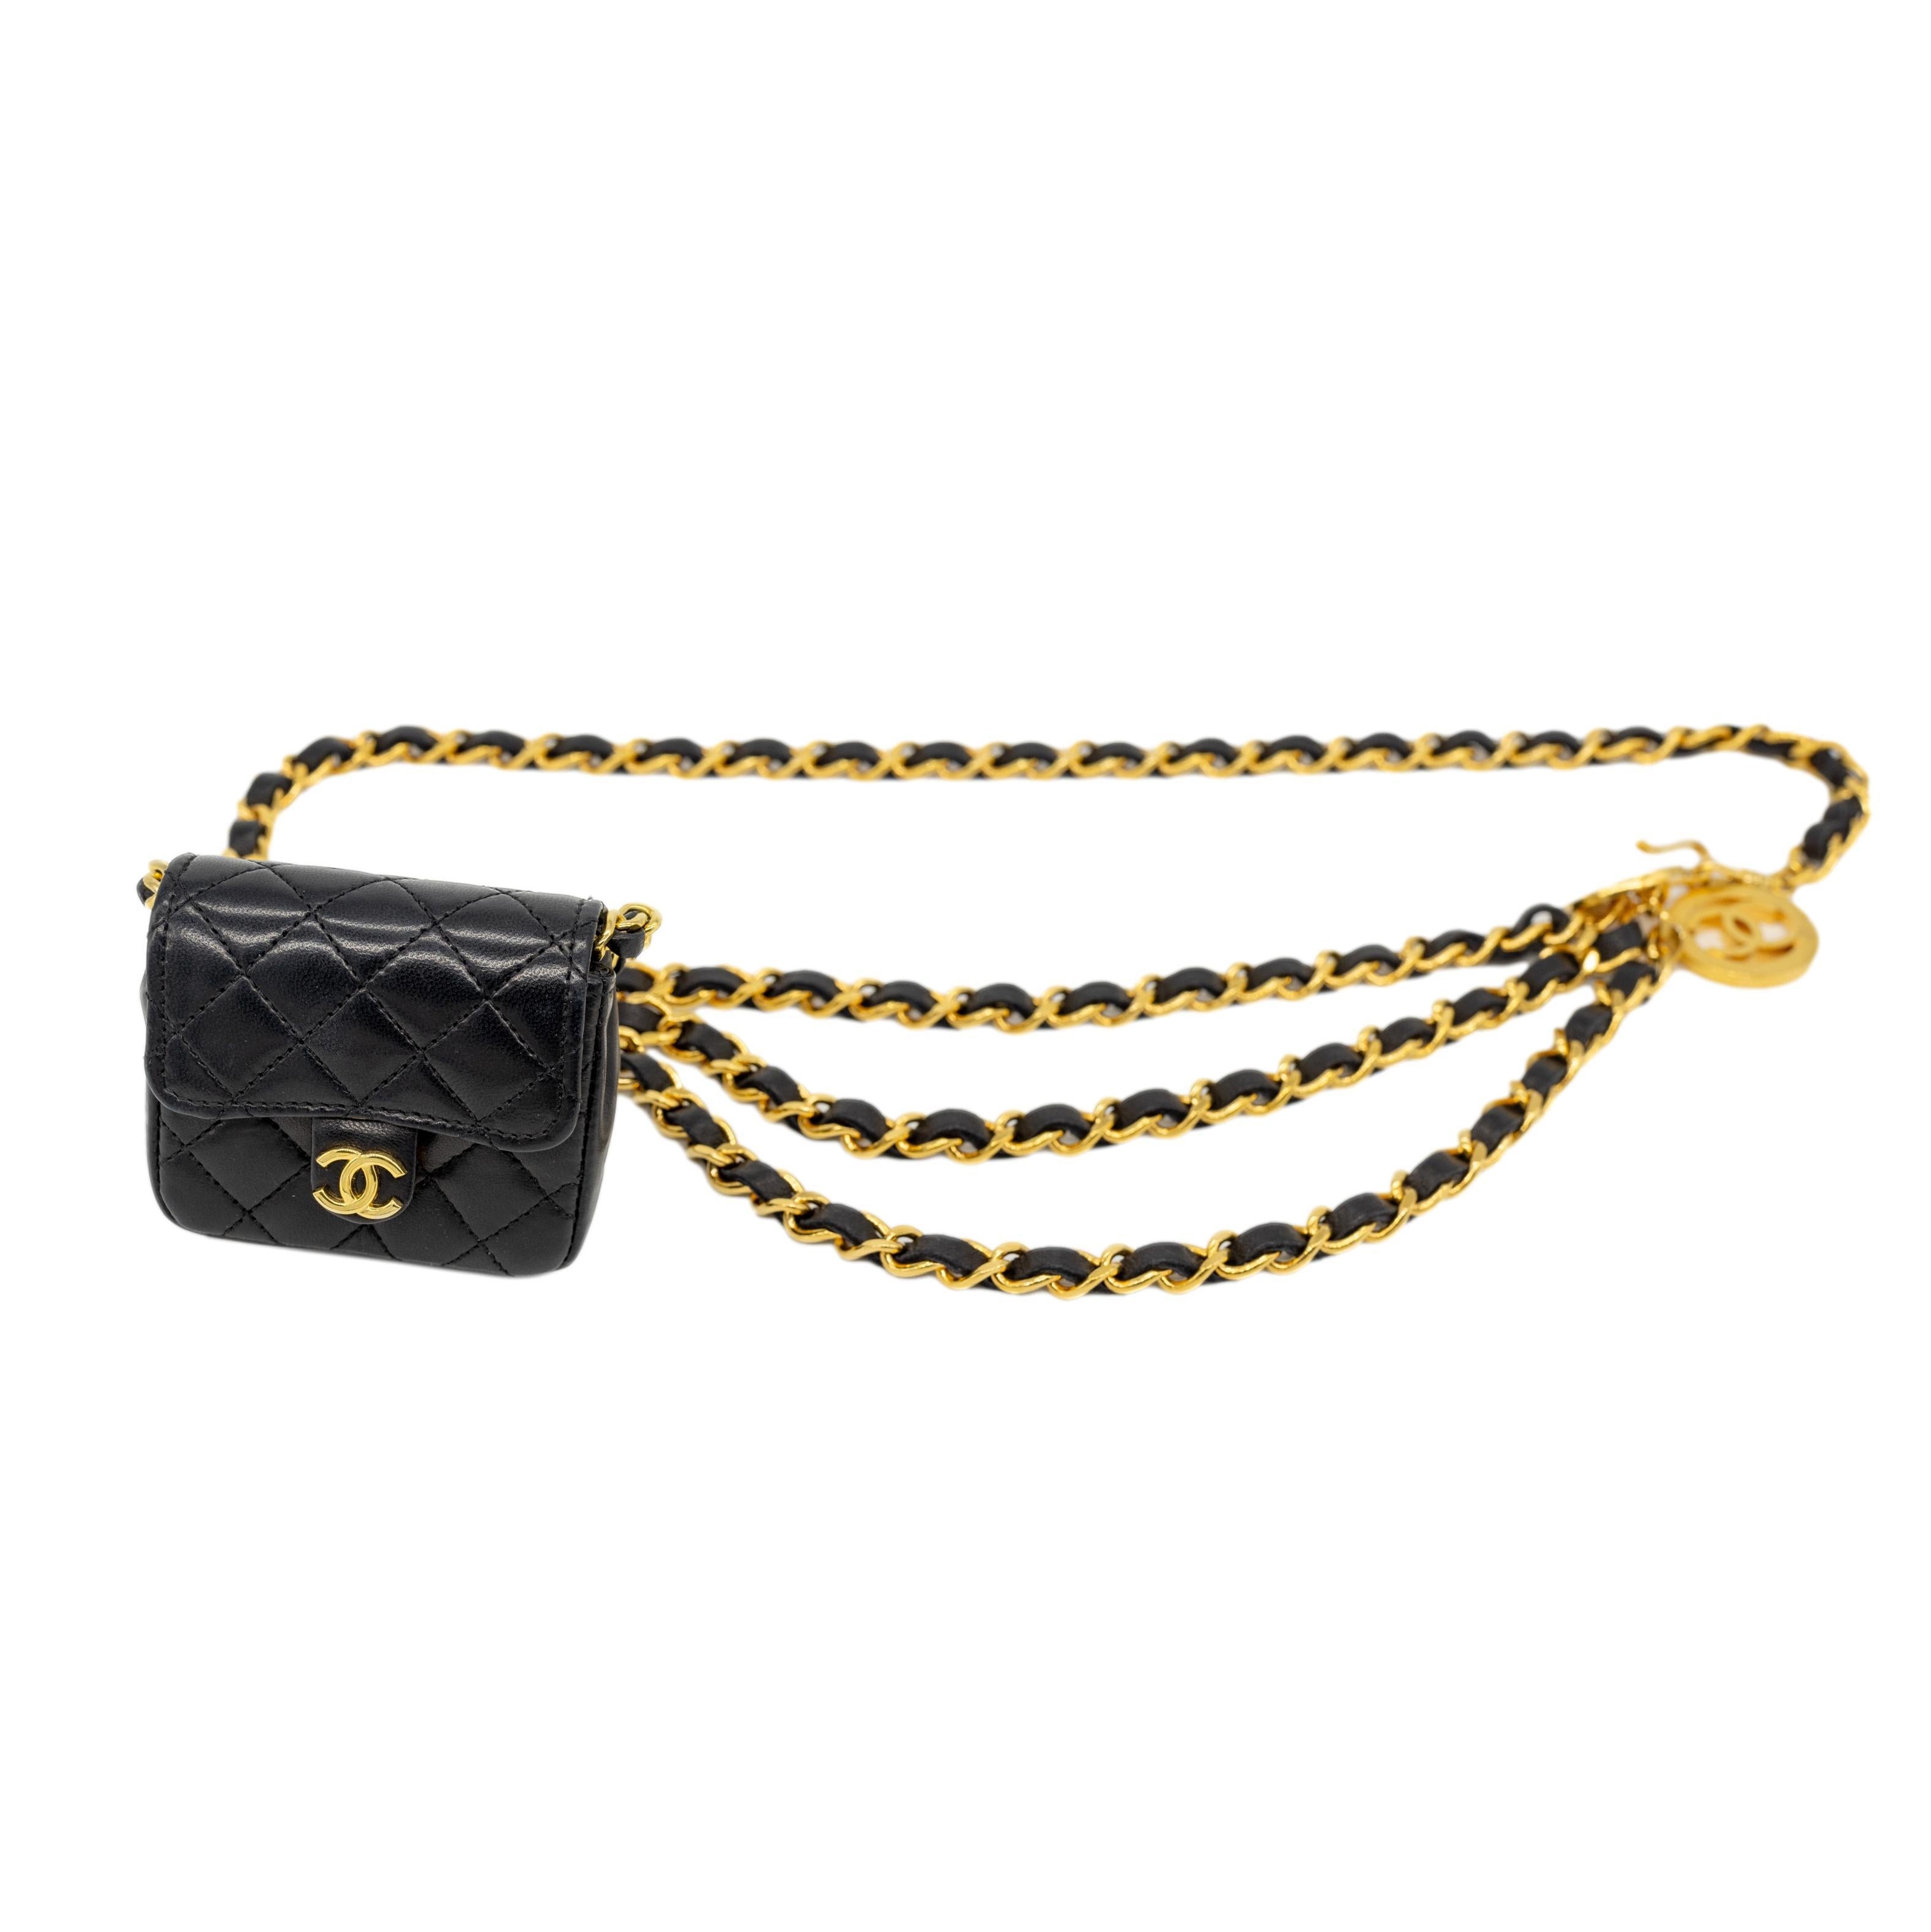 Chanel Vintage Black Leather Detachable Micro Flap Bag on 24KT Gold Triple Swag Medallion Belt, 1984. The iconic Chanel bag was originally issued by Coco Chanel in February 1955 which became the very first socially acceptable shoulder bag for the